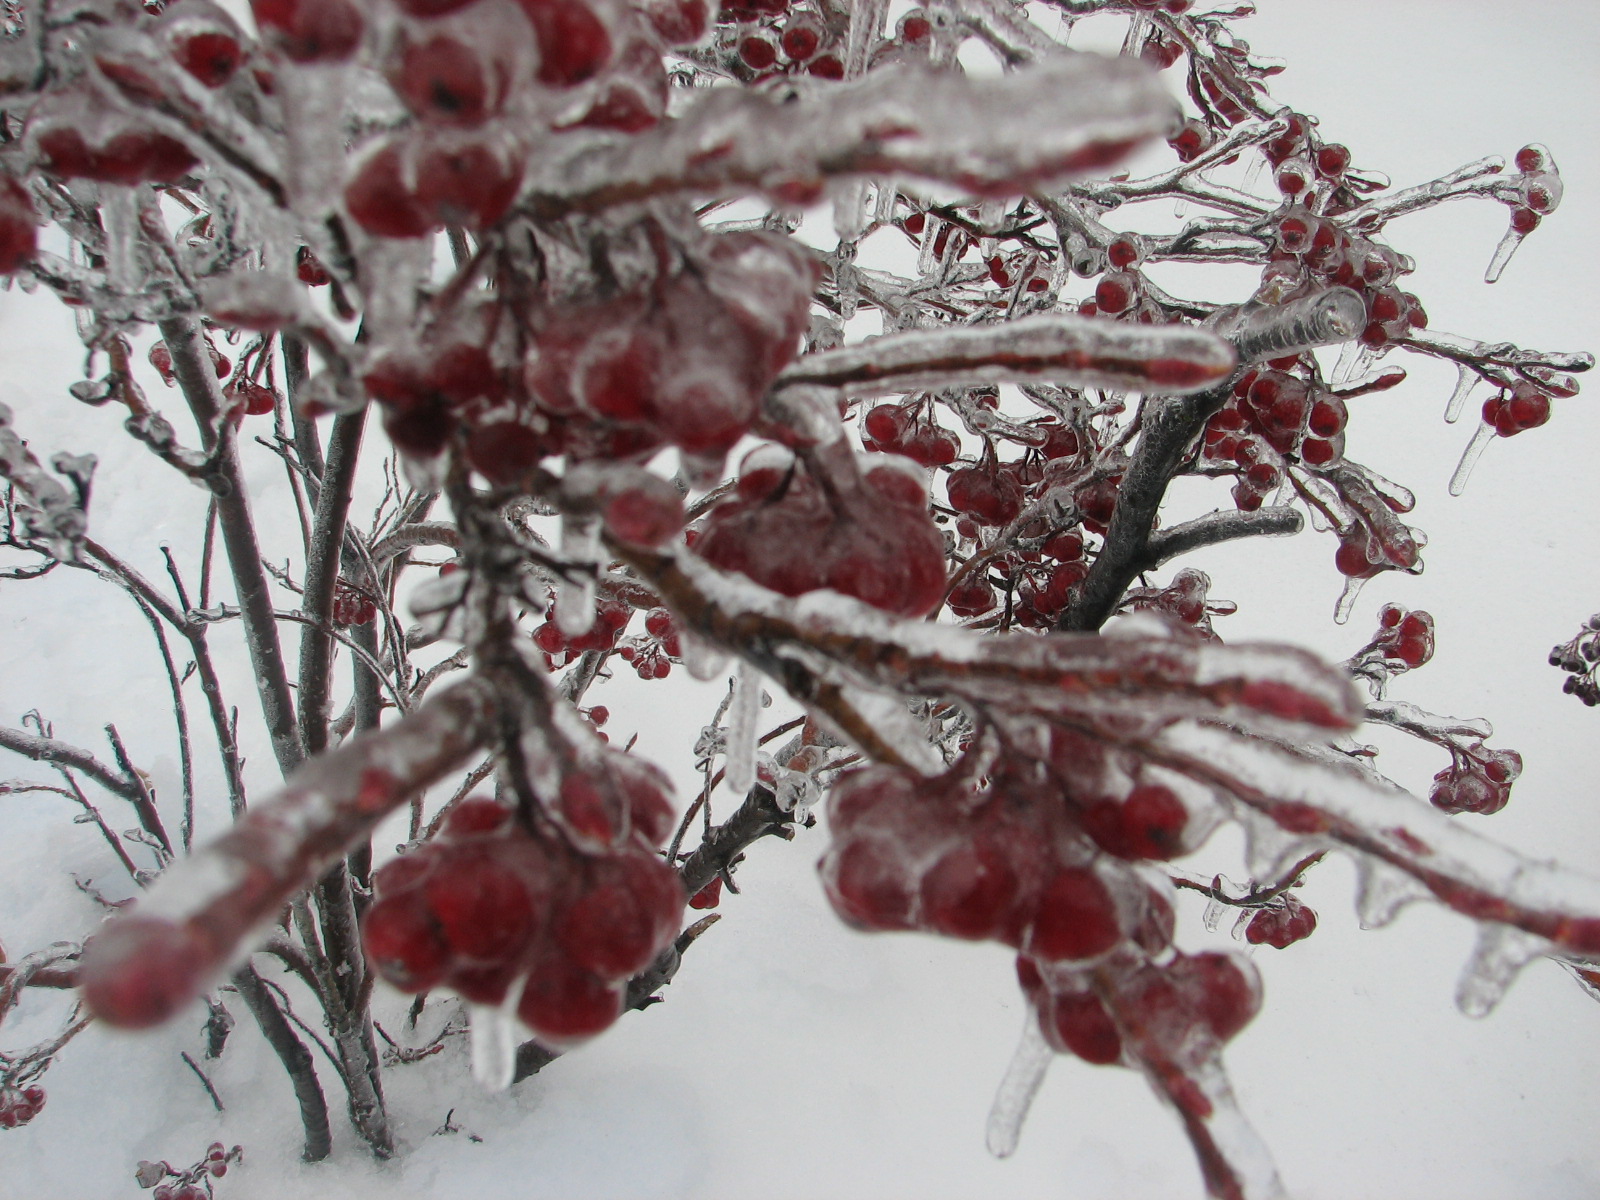 Berry bush covered in a thick layer of ice.